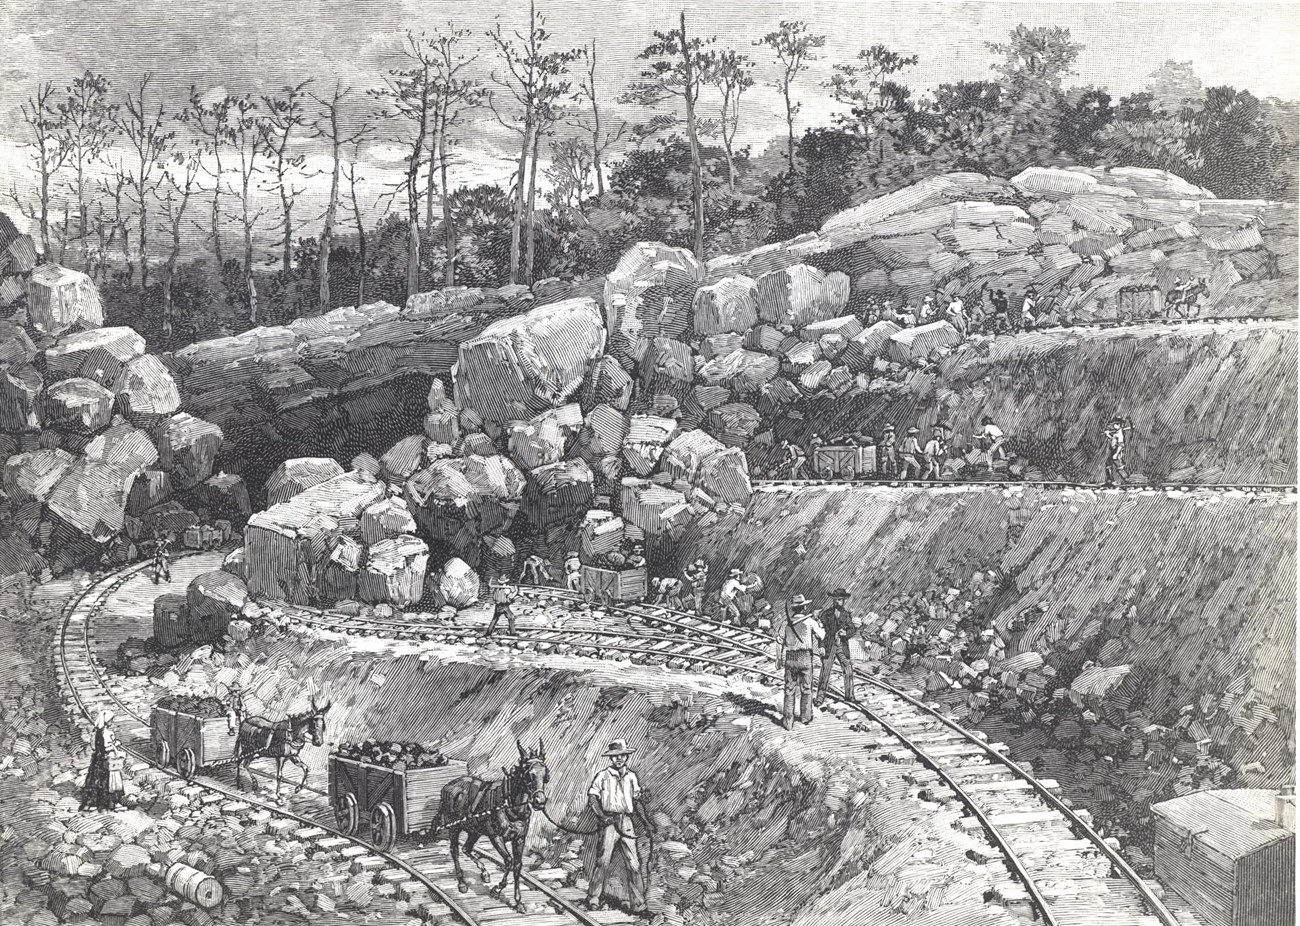 Sketch of miners searching for ore.